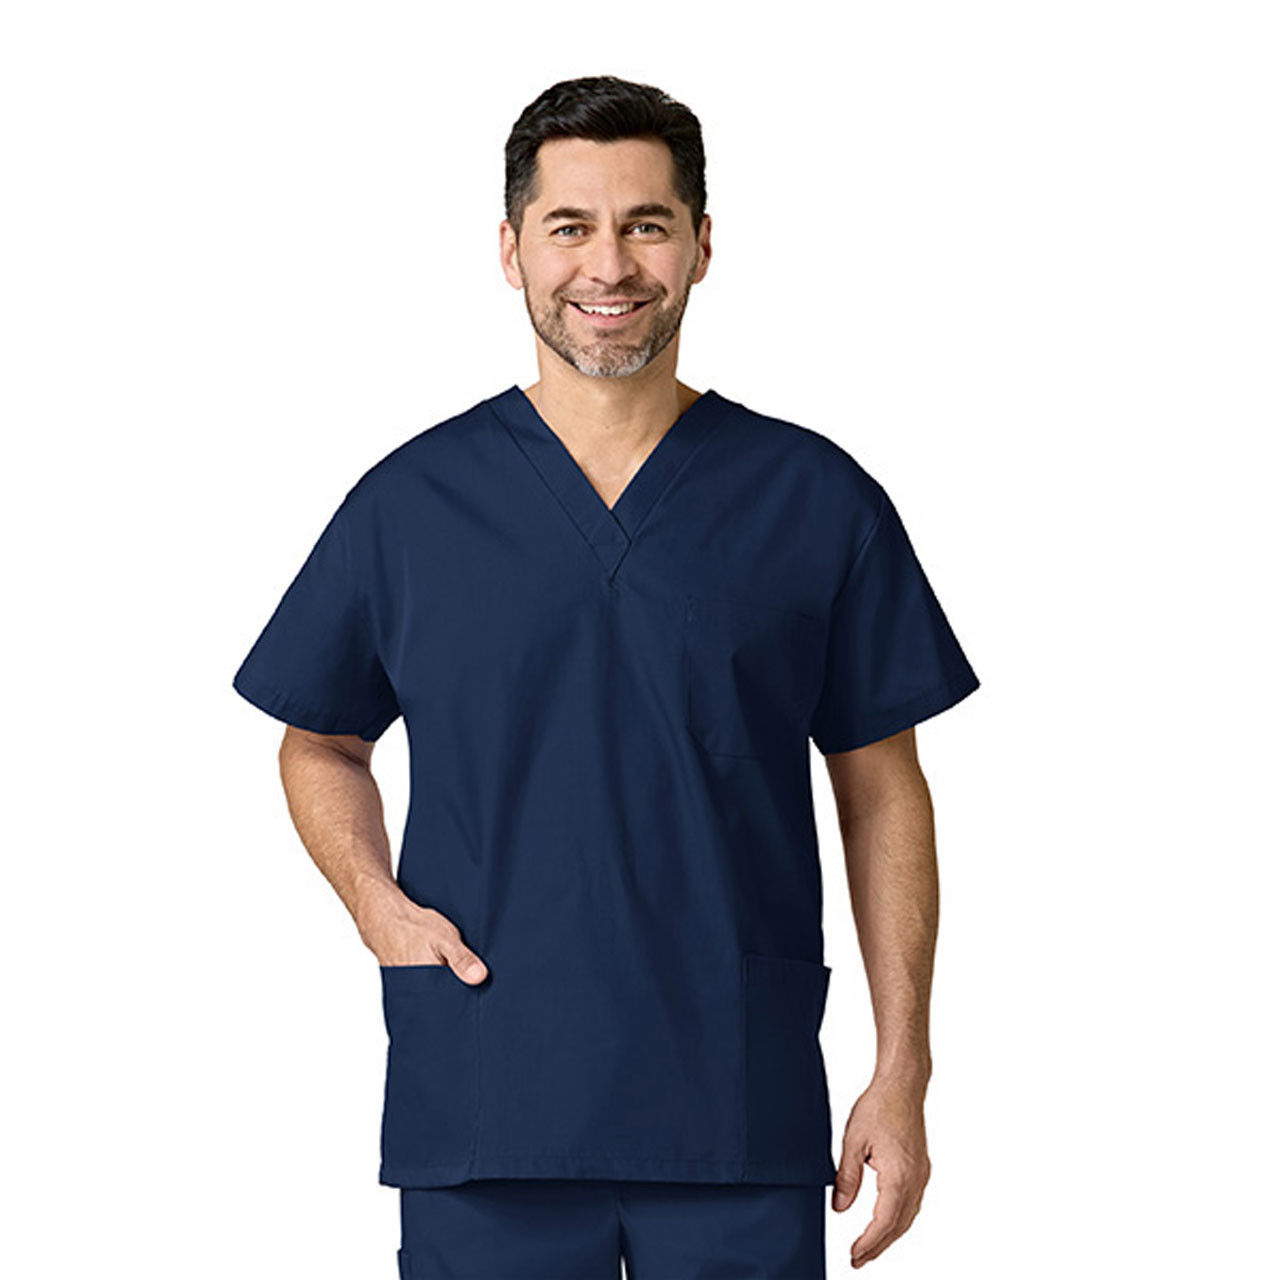 Does the Navy Blue Scrub Top have side vents?